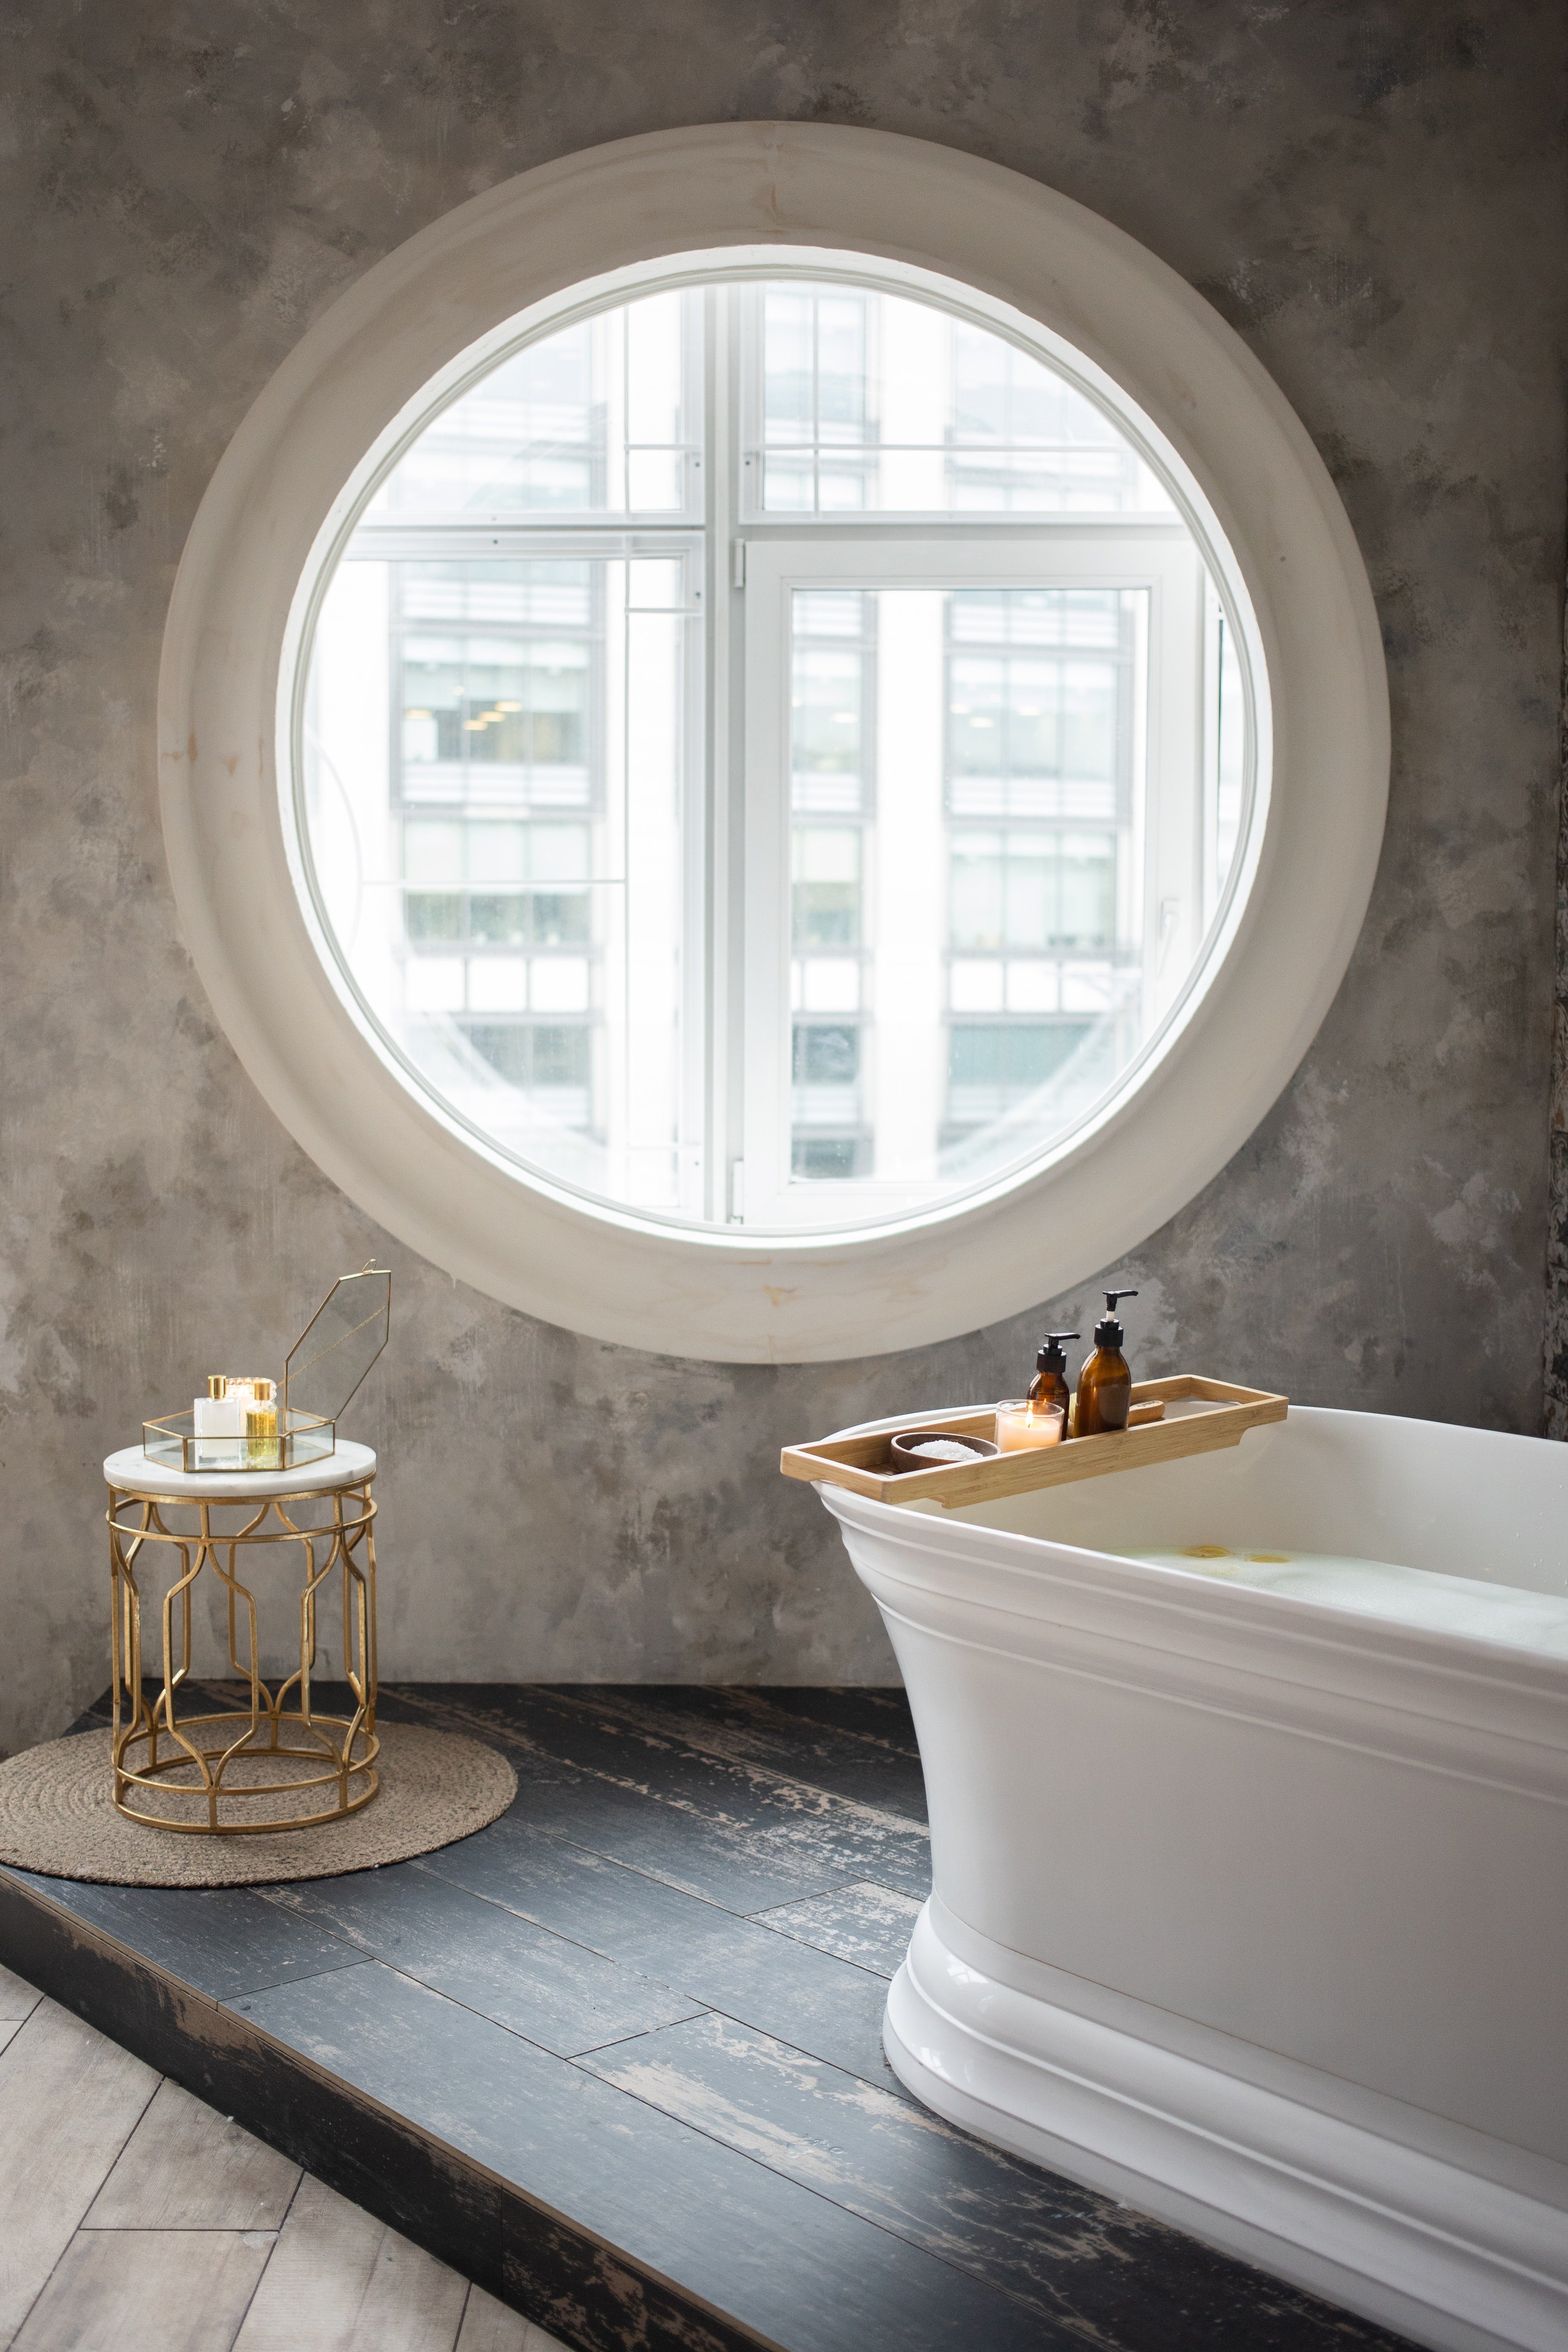 Pictured - An interior of a modern bathroom | Source: Pexels 